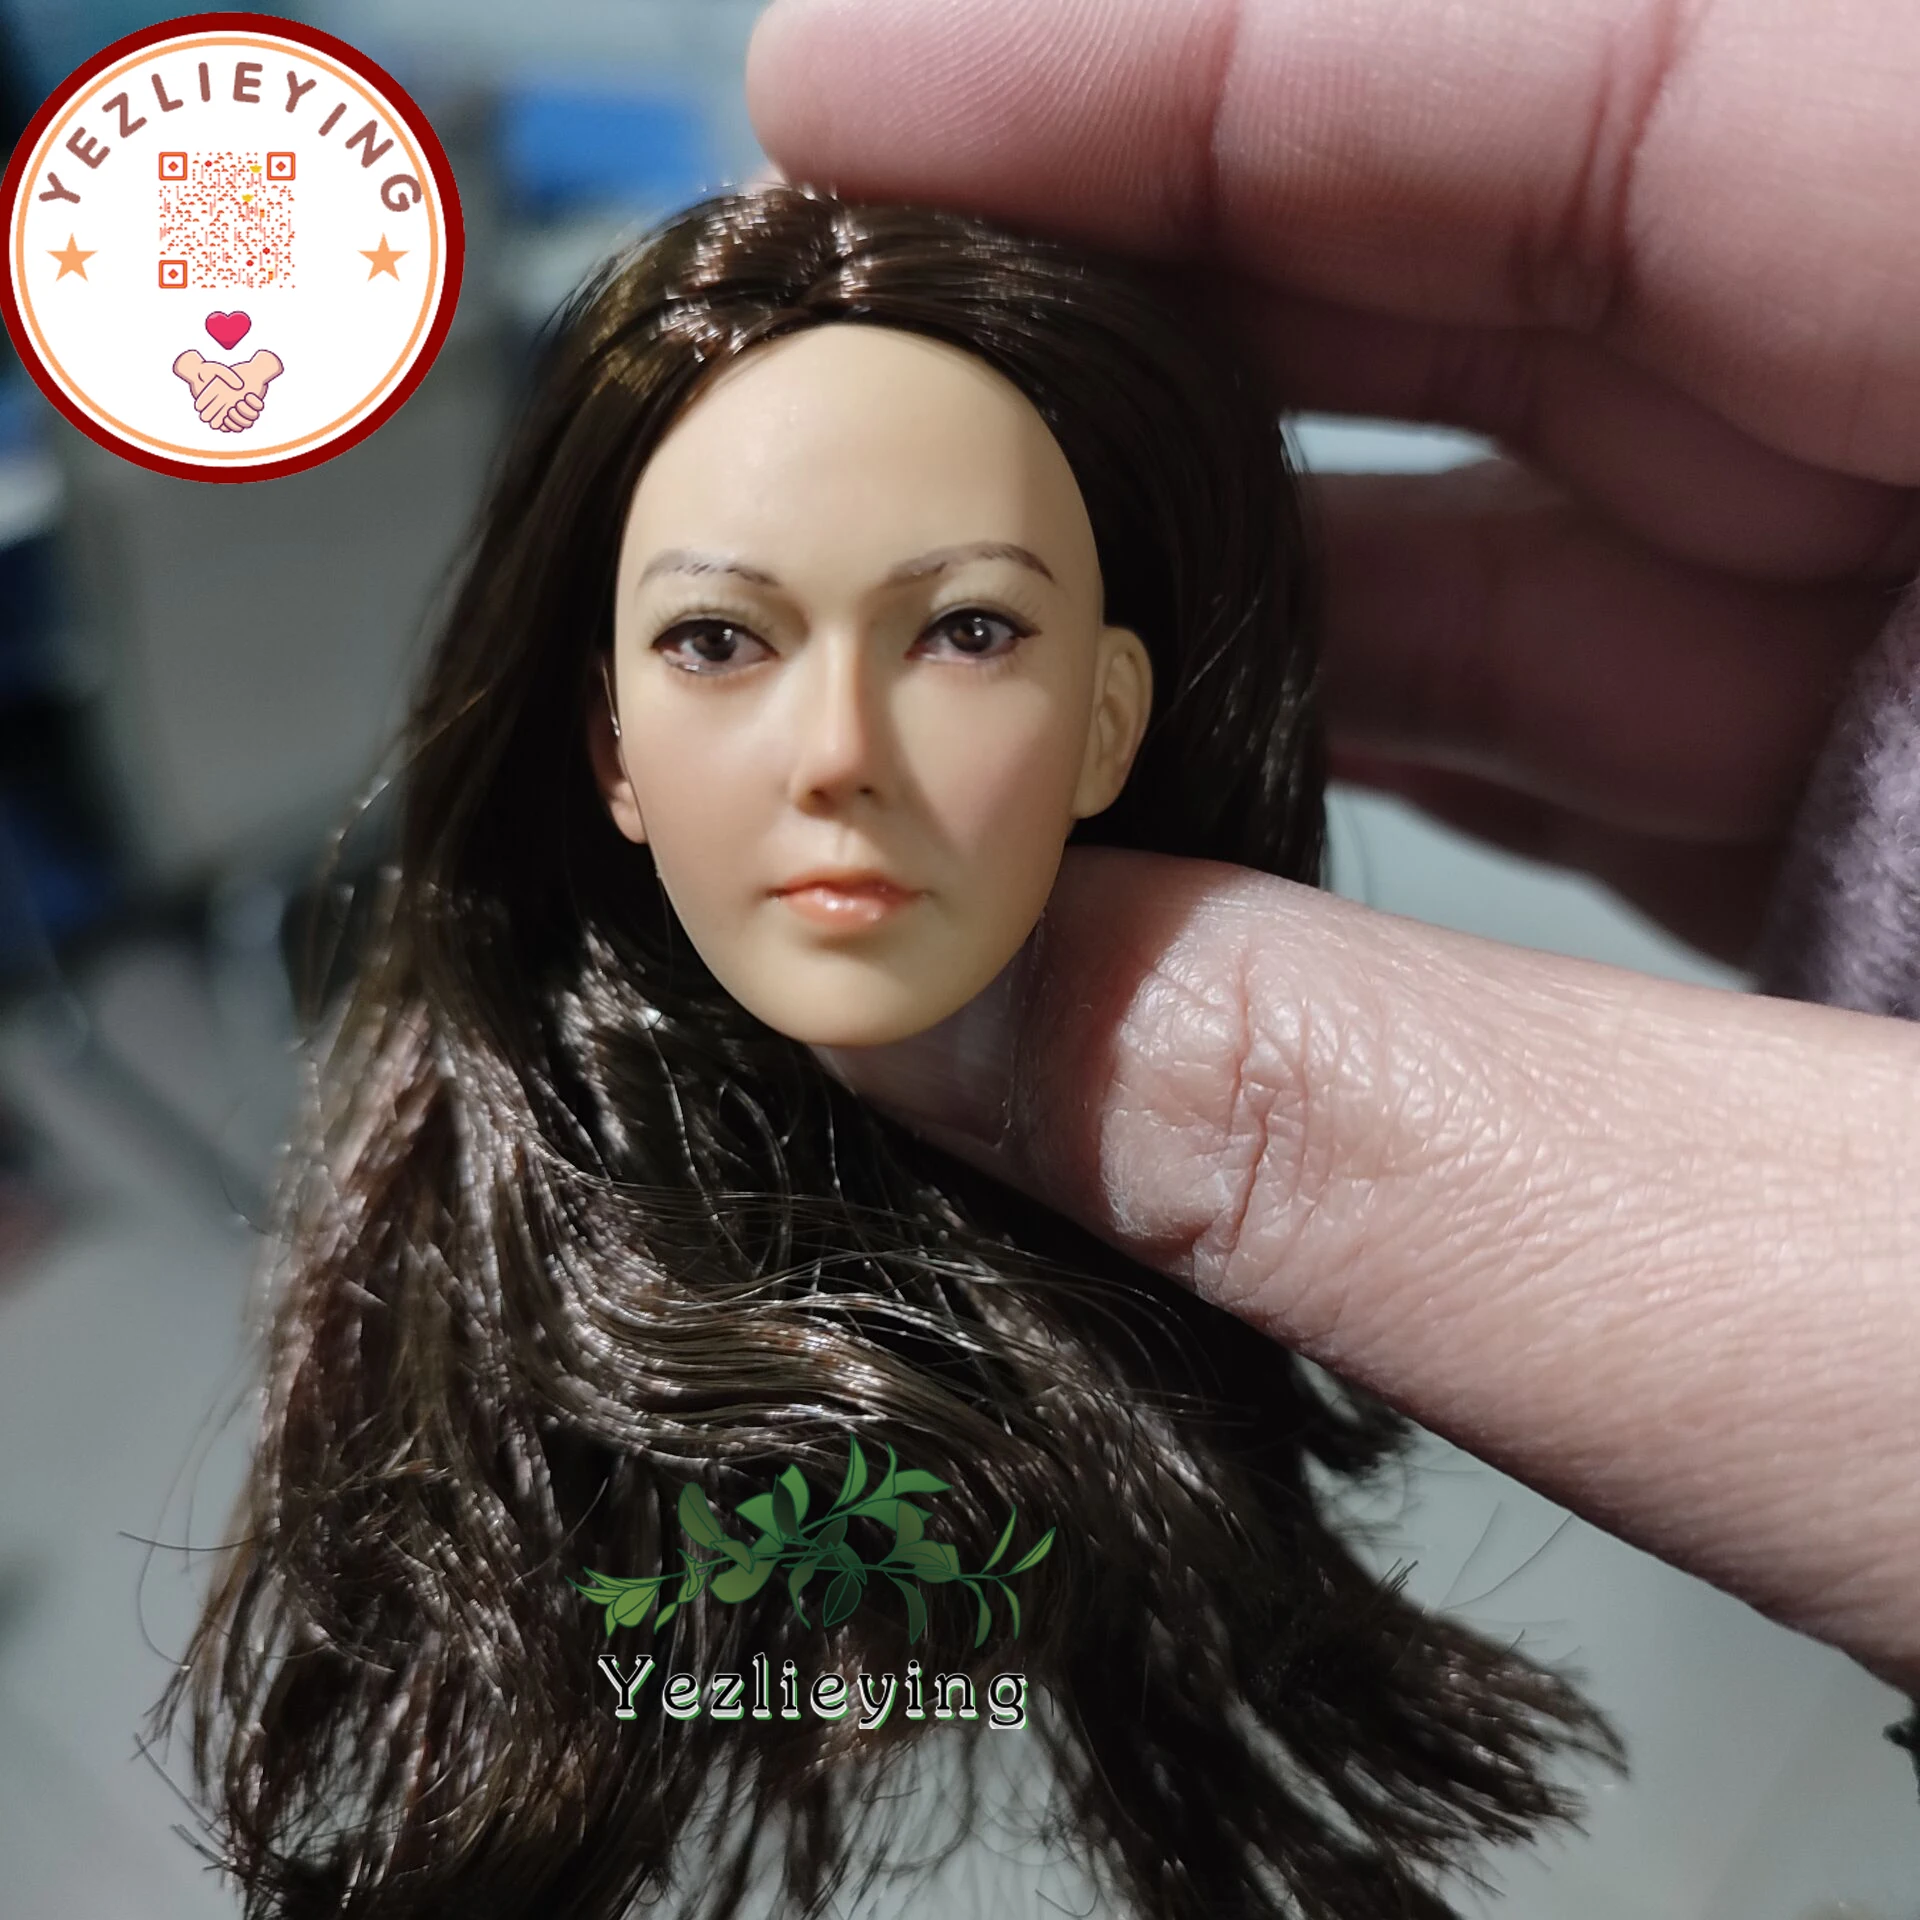 

KUMIK 1/6 Scale Action Figure Accessories Female Head Sculpt KM 13-56 Brown Curly Hair HeadCarving F 12" Body for children Gift